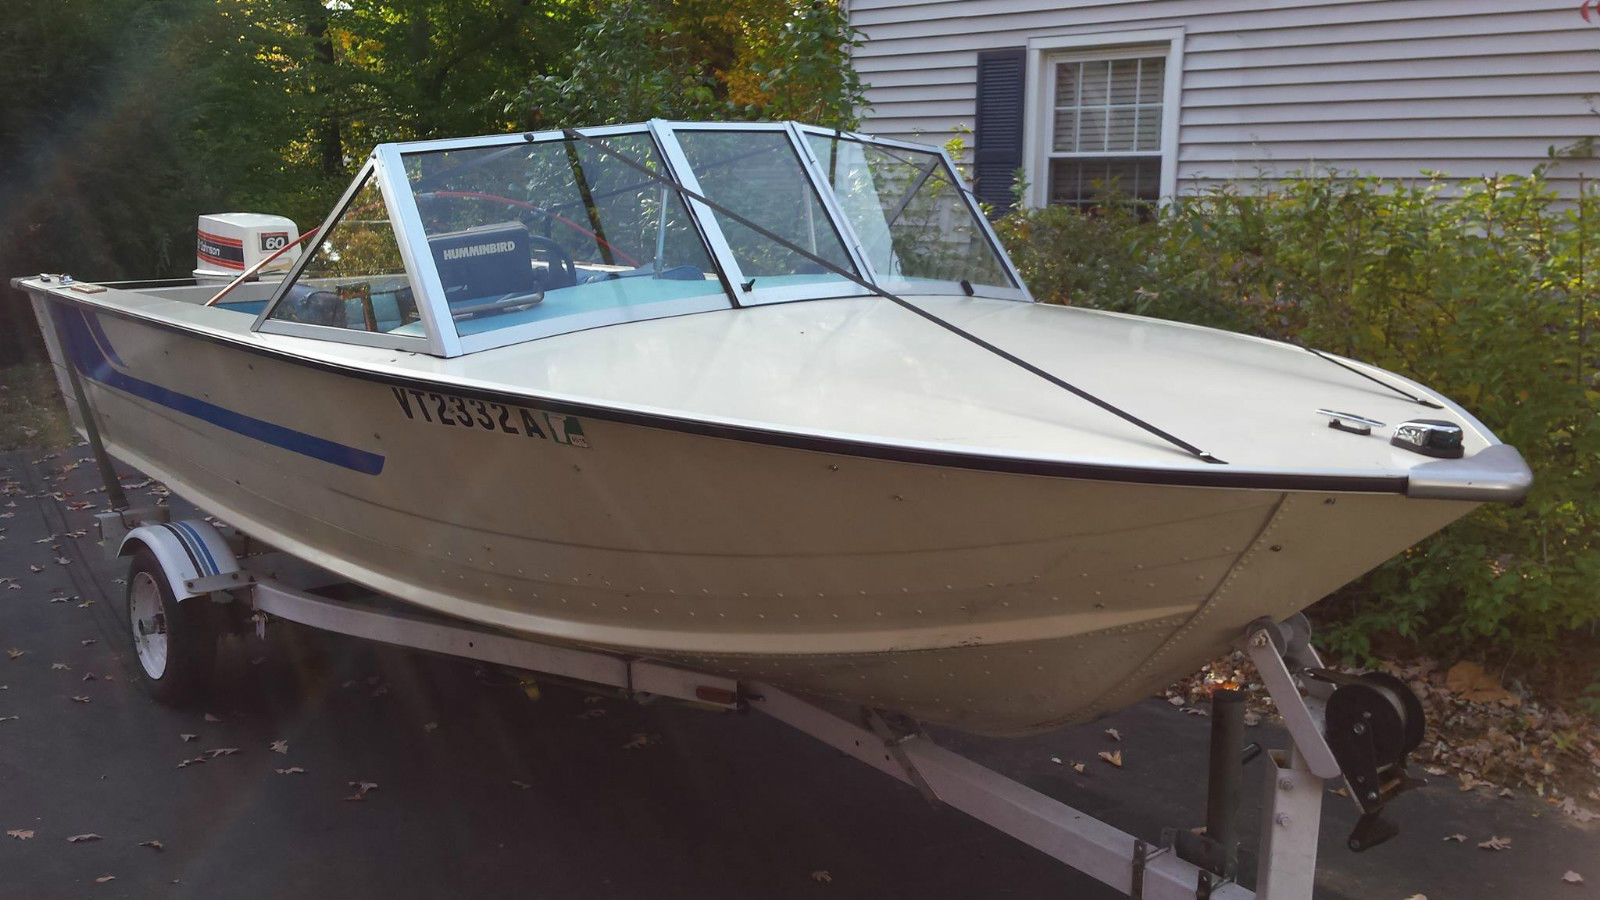 Starcraft Holiday 16 1981 for sale for $1,900 - Boats-from ...